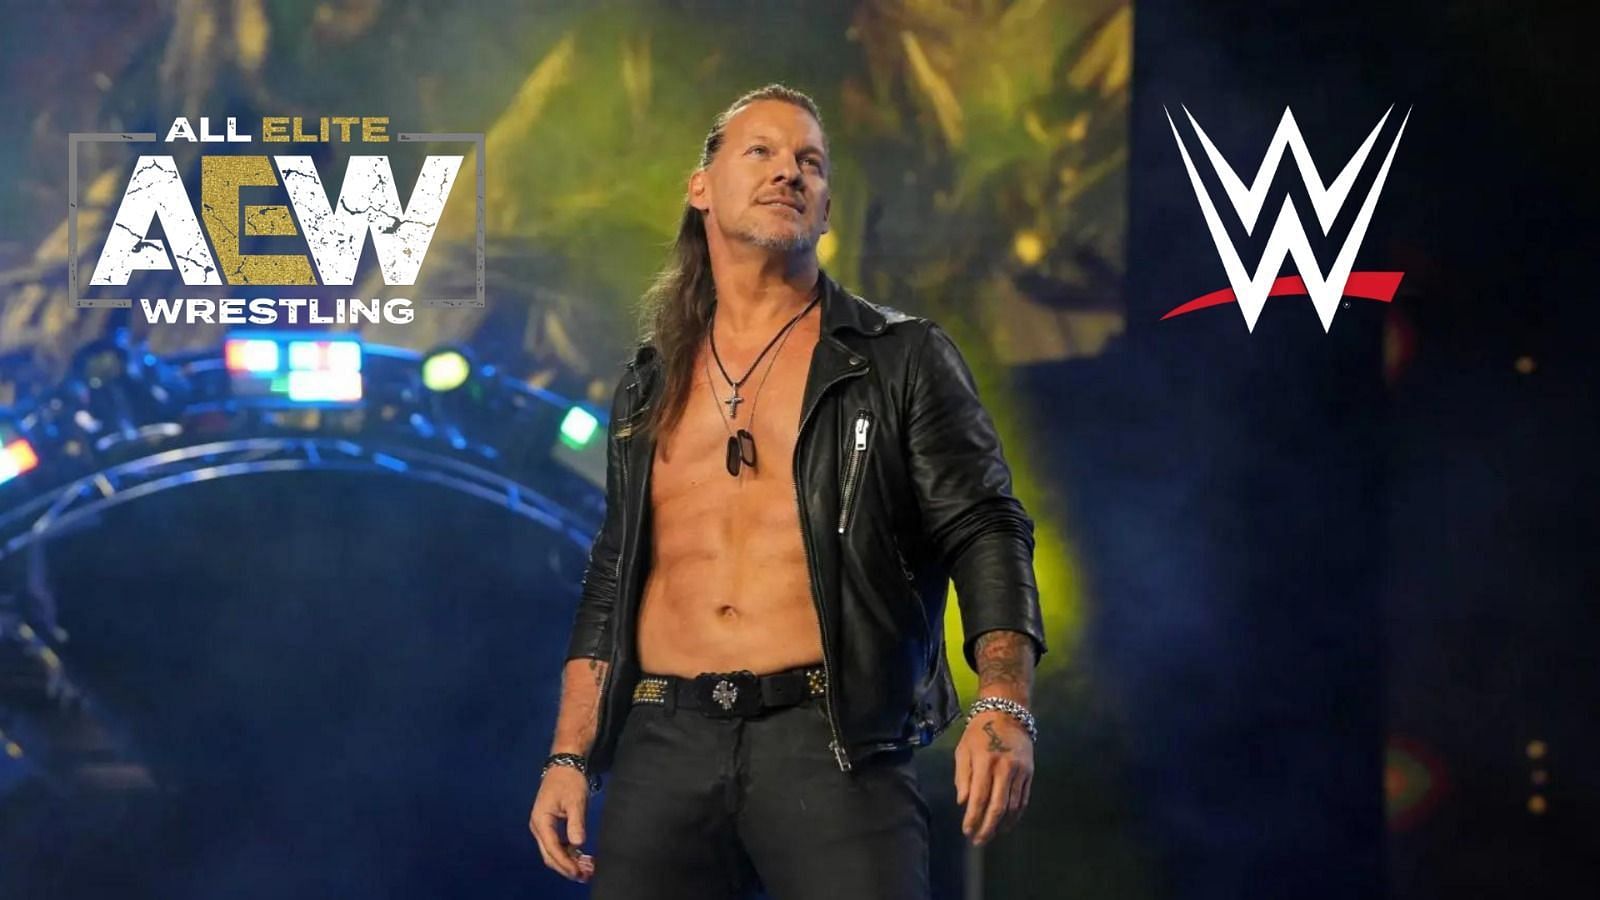 Chris Jericho is a wrestling icon currently with AEW